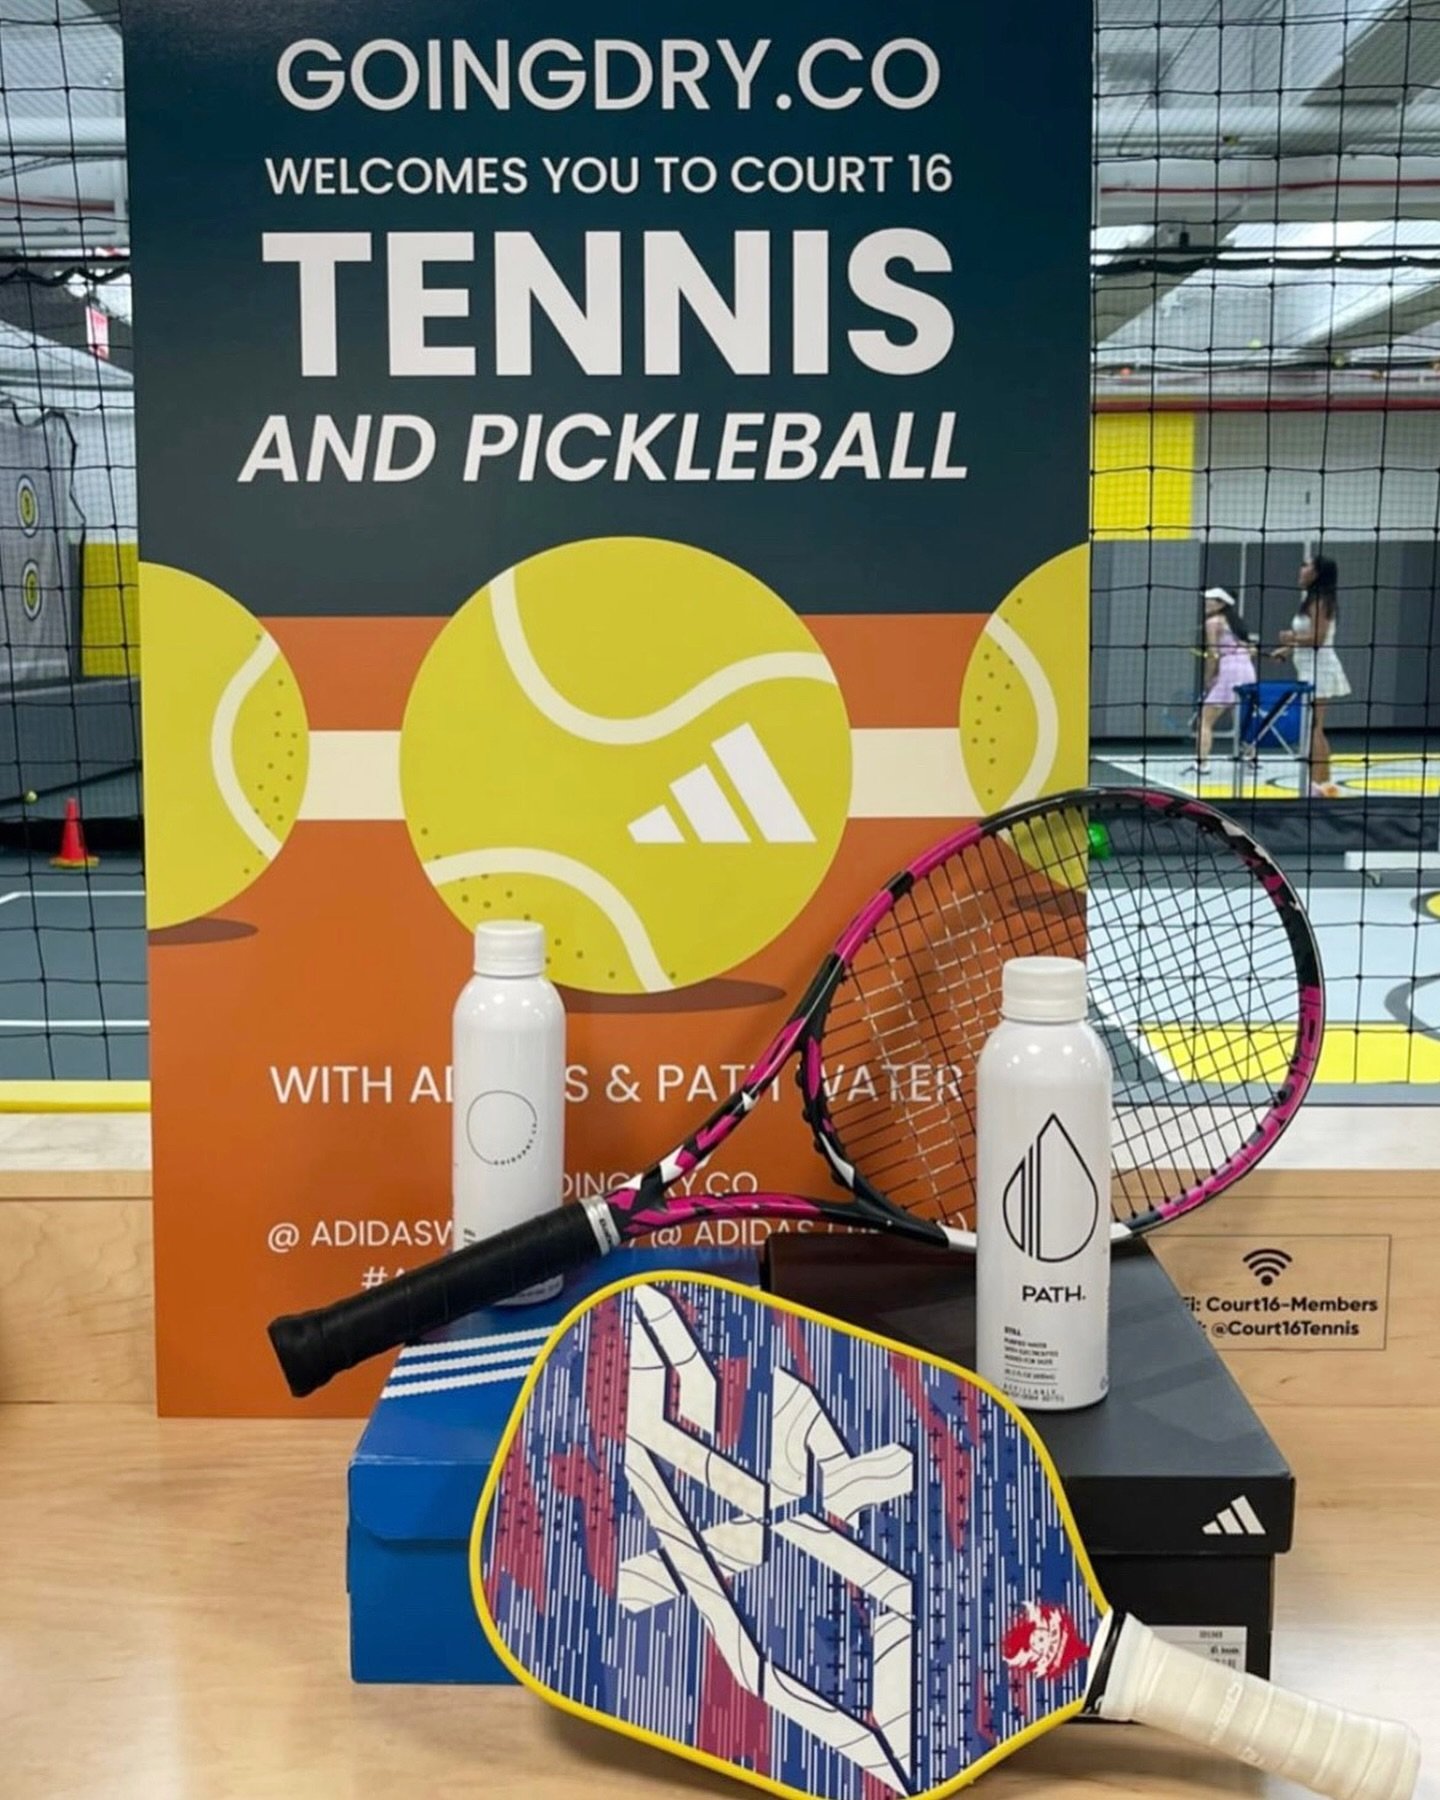 We were thrilled to team up with @goingdry.co to celebrate the launch of @hilarywritesny&rsquo;s latest book #GoingDryBook at our Fidi club! 📚 Guests decked in @adidaswomen outfits enjoyed our ball machine training class and pickleball clinic and st